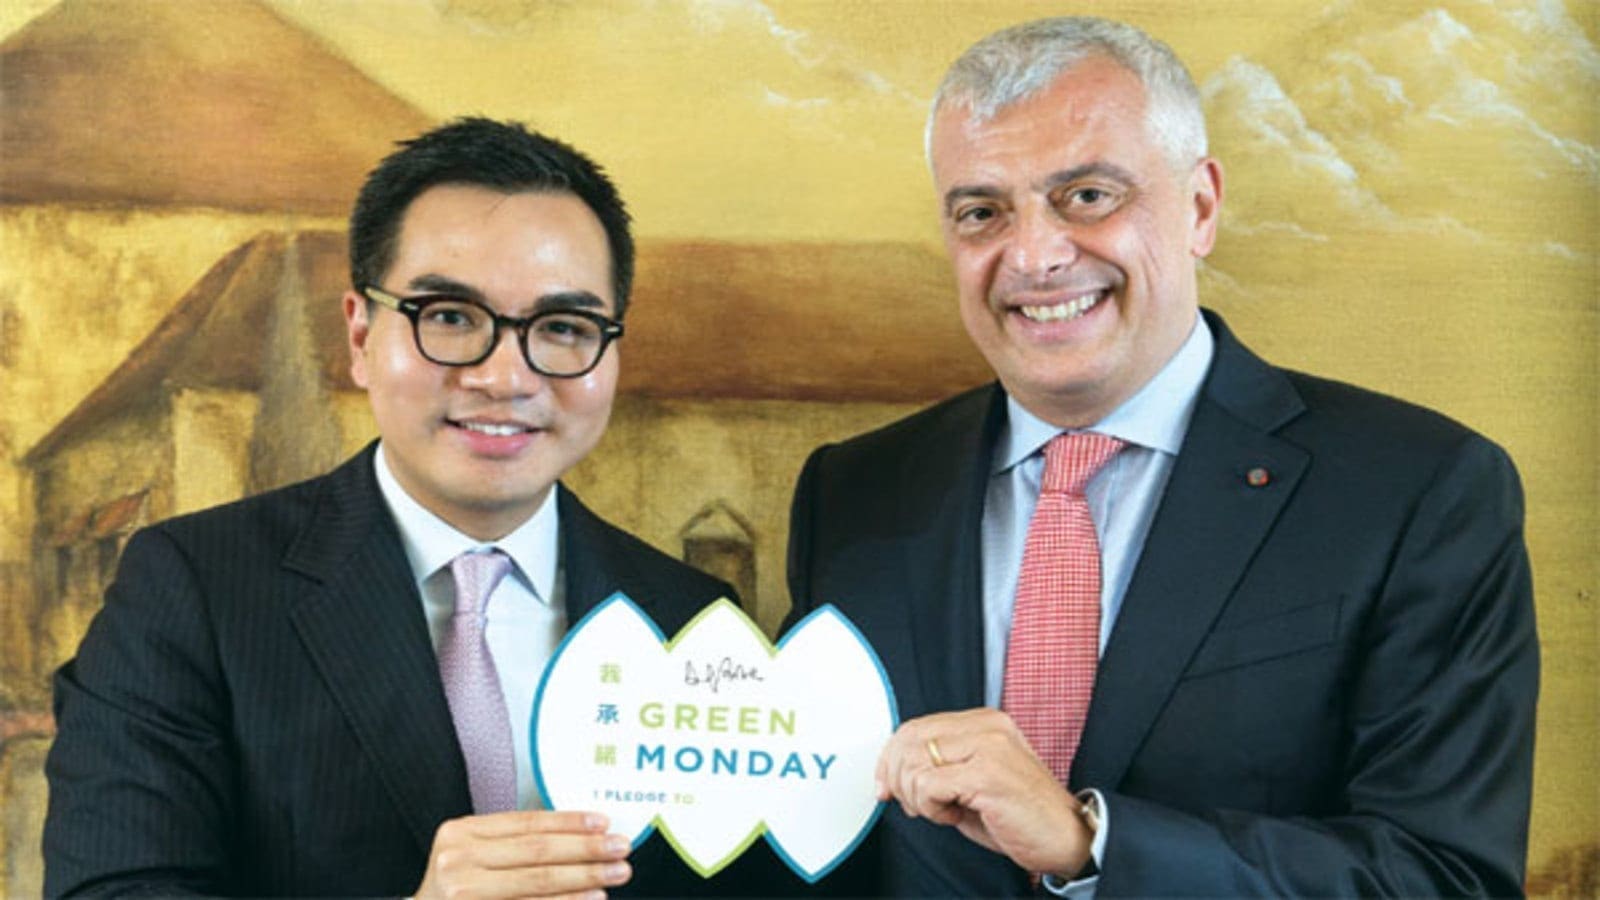 Hong Kong based food security venture Green Monday secures US$70m financing for its R&D efforts